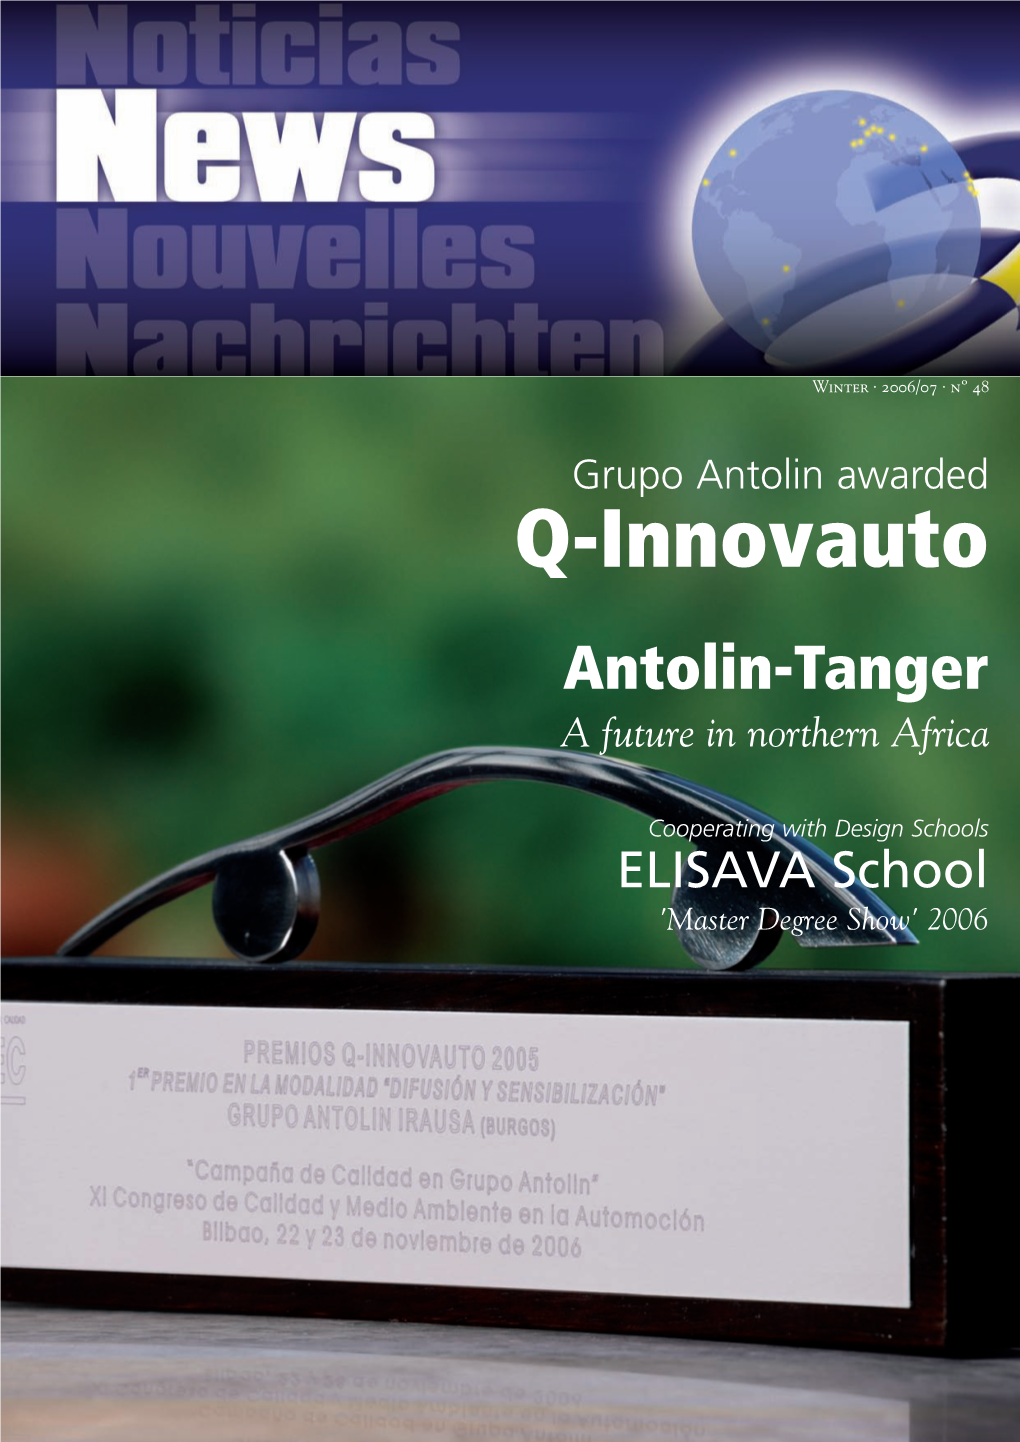 Antolin-Tanger a Future in Northern Africa